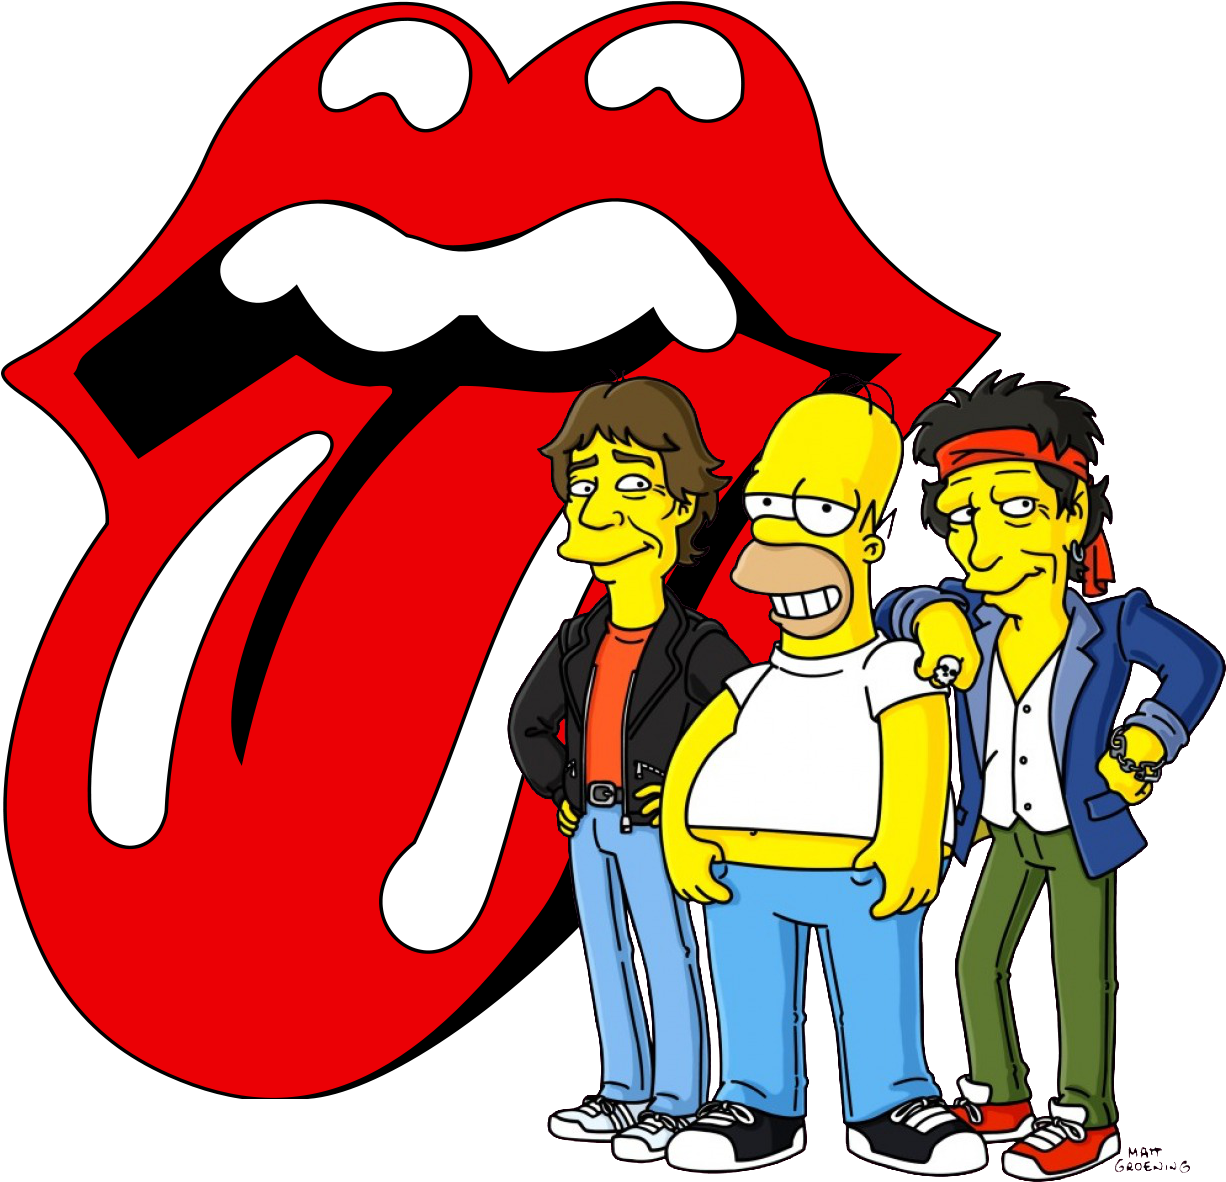 Homer Simpson Mick Jagger Rolling Stones The Simpsons - Rolling Stones The Simpsons (1600x1200)